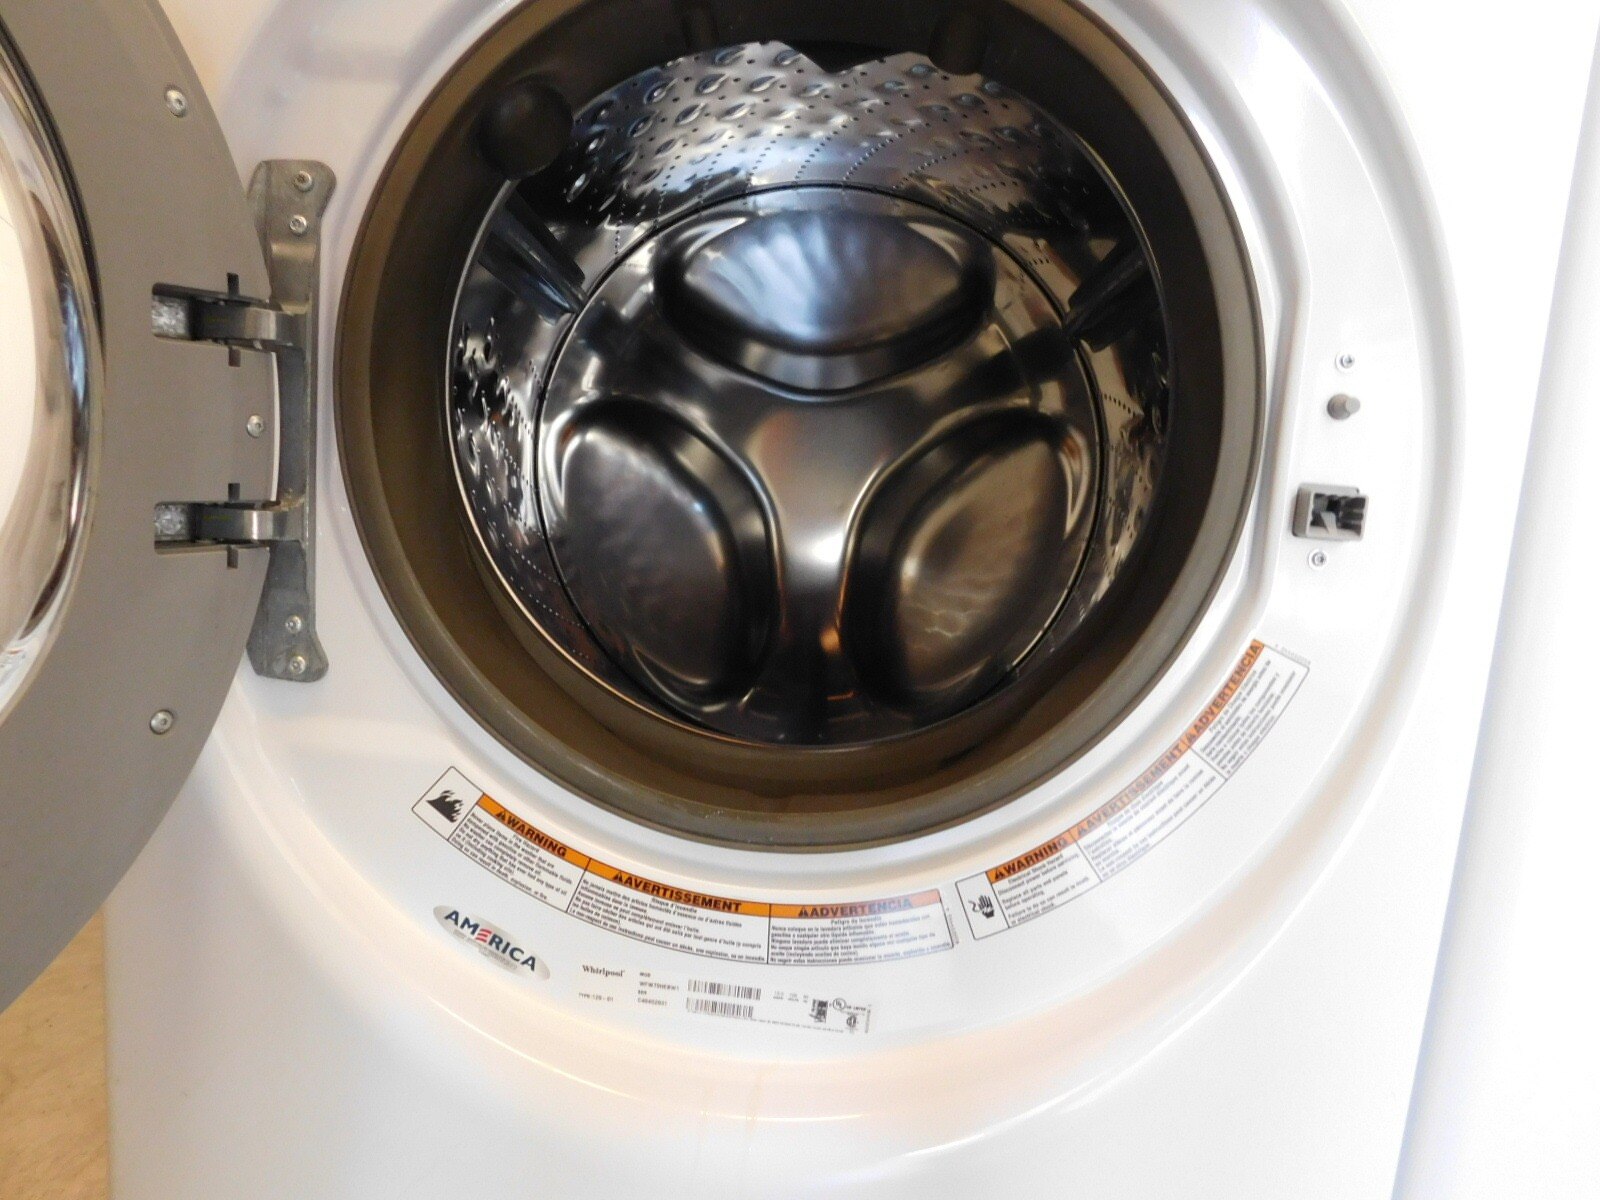 How To Fix The Error Code F37 For Whirlpool Washer